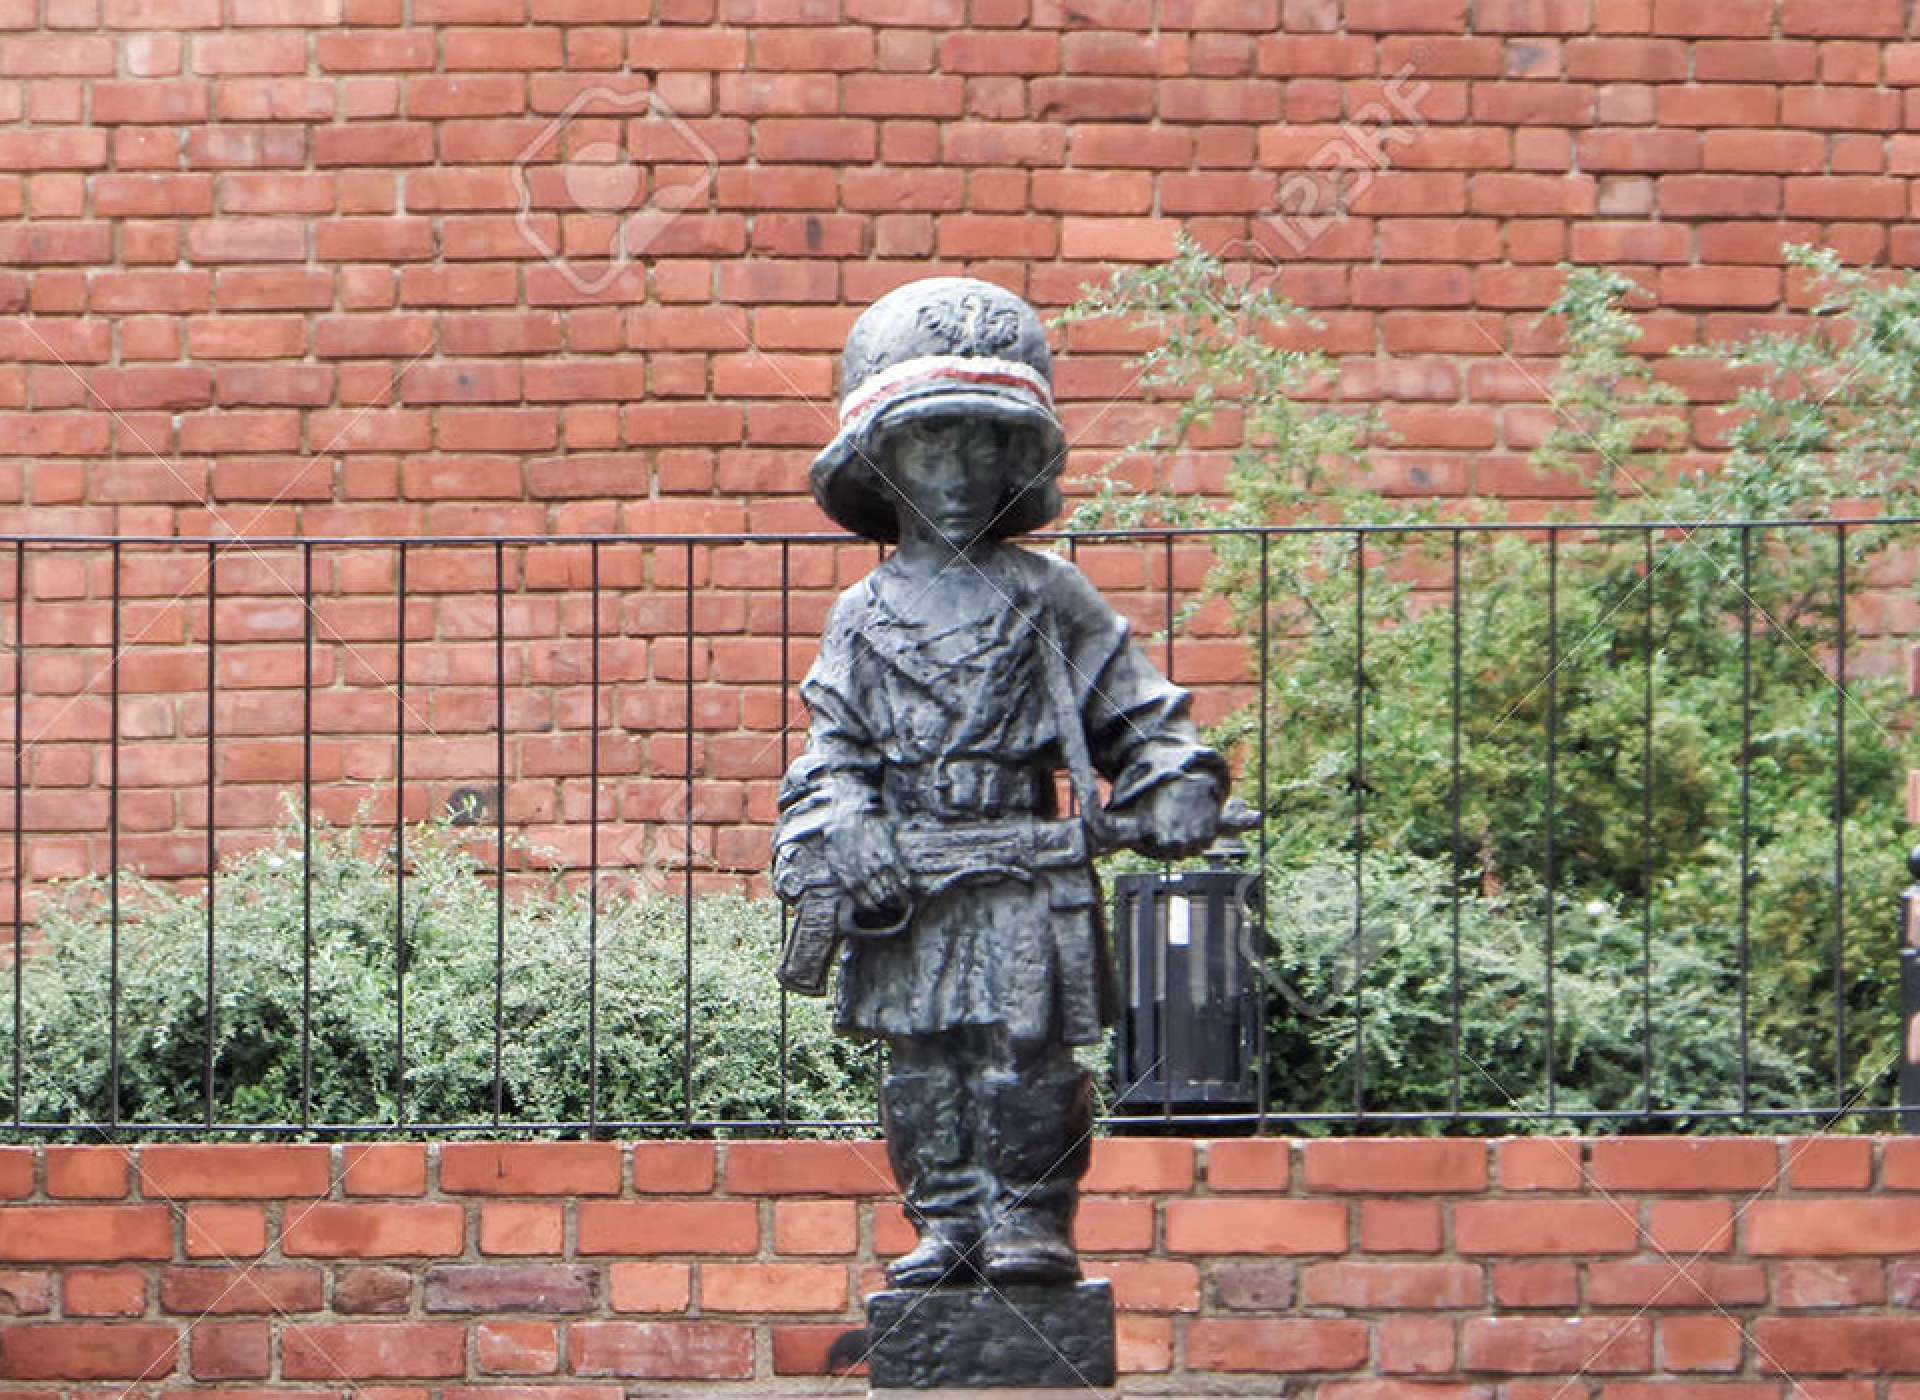 The Little Insurgent Monument located in Warsaw